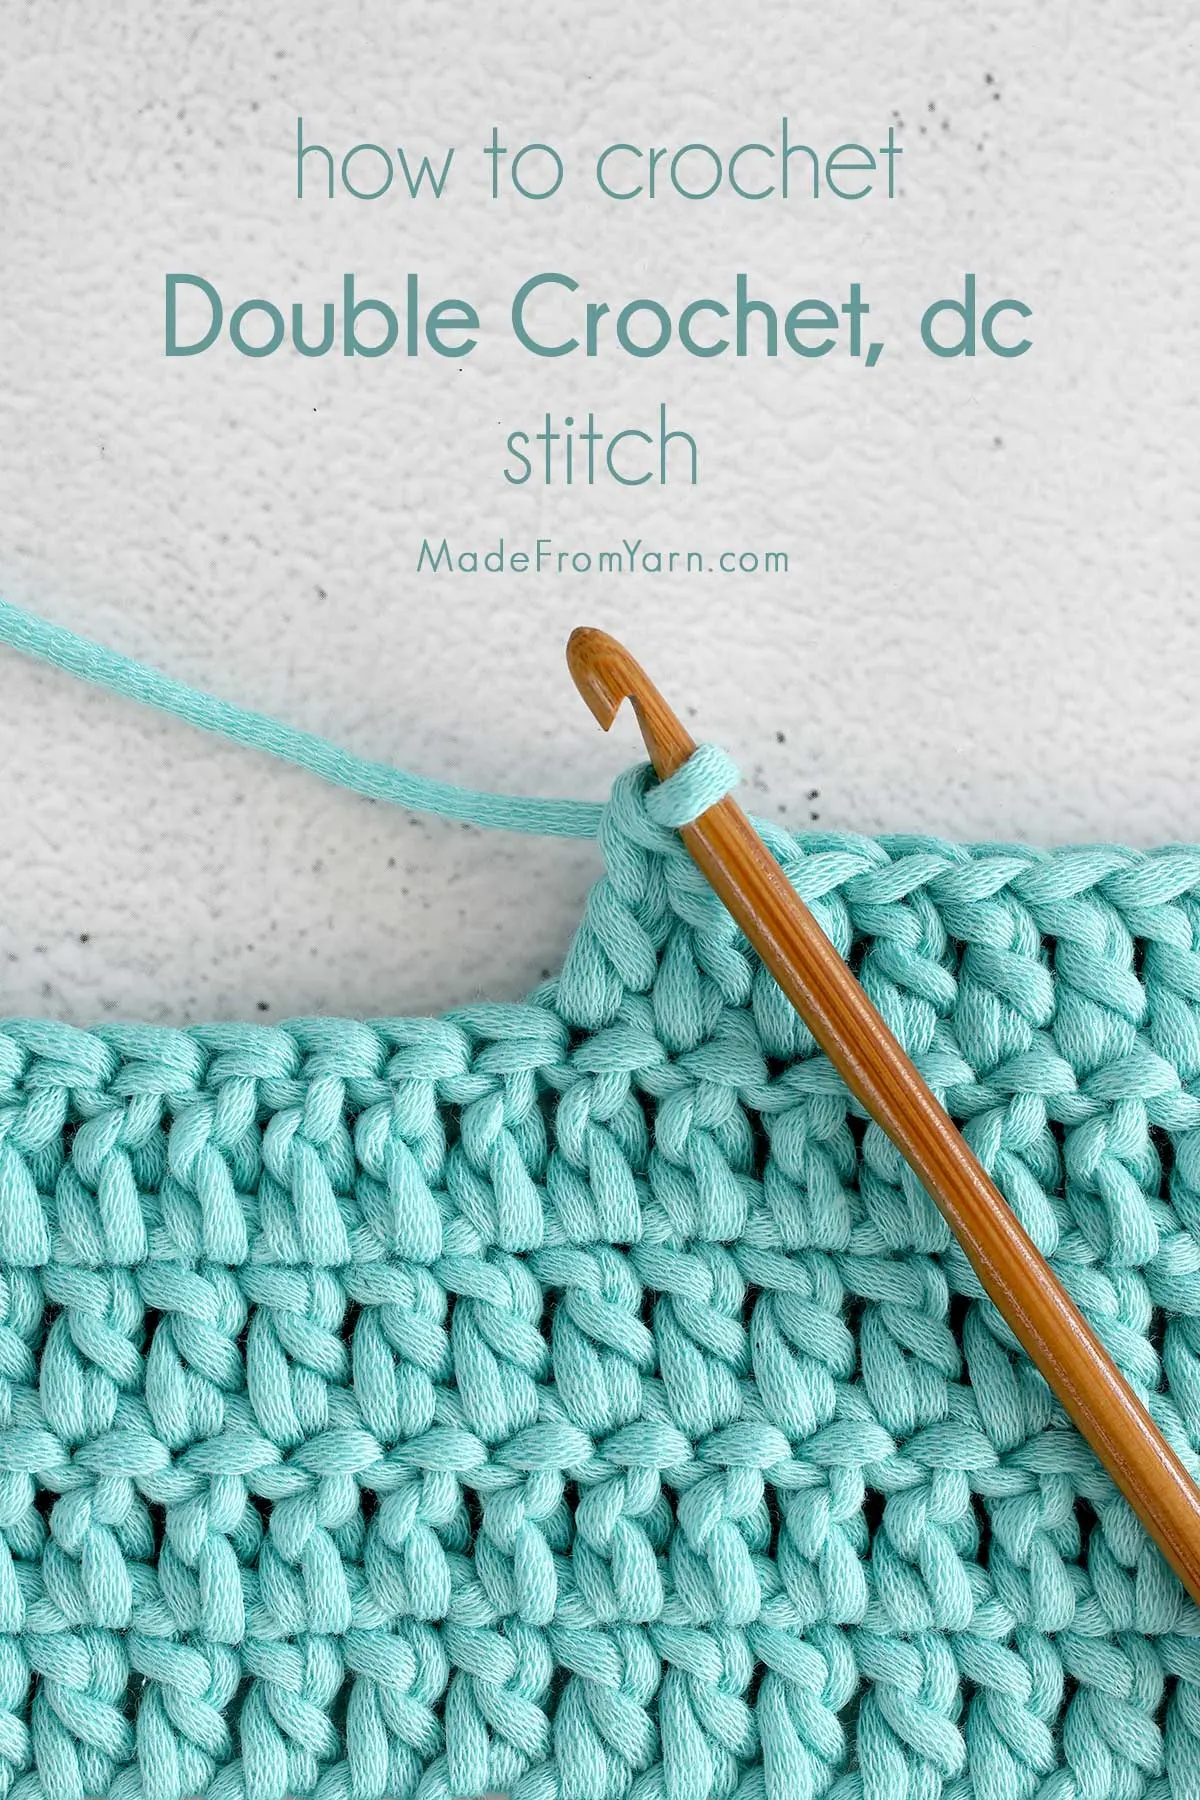 17 Thick Crochet Stitches to Try for Your Next Project 